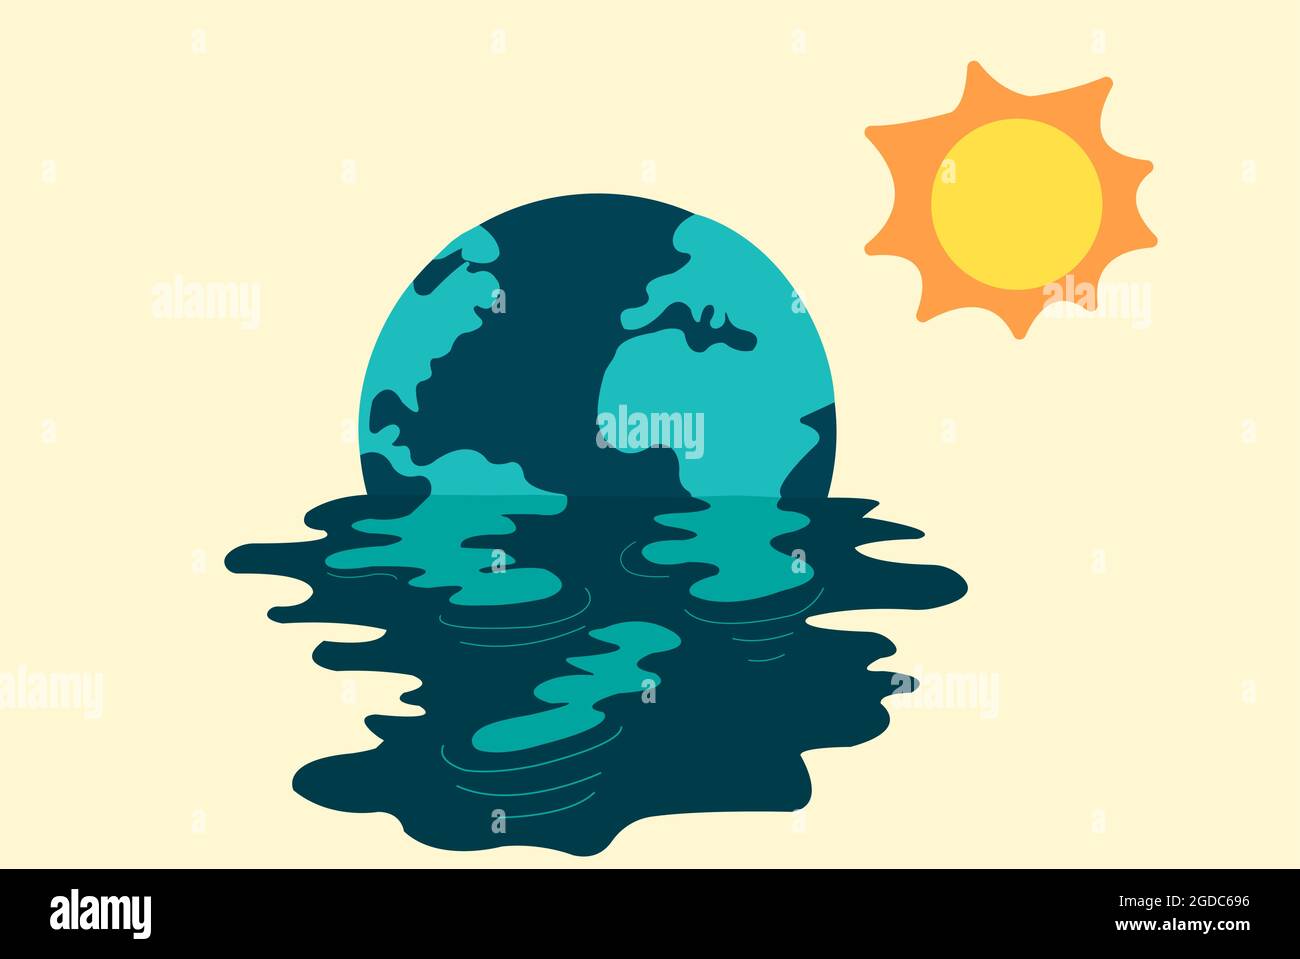 Illustration of a melting world, where the temperature is very high due to climate crisis. Stock Vector